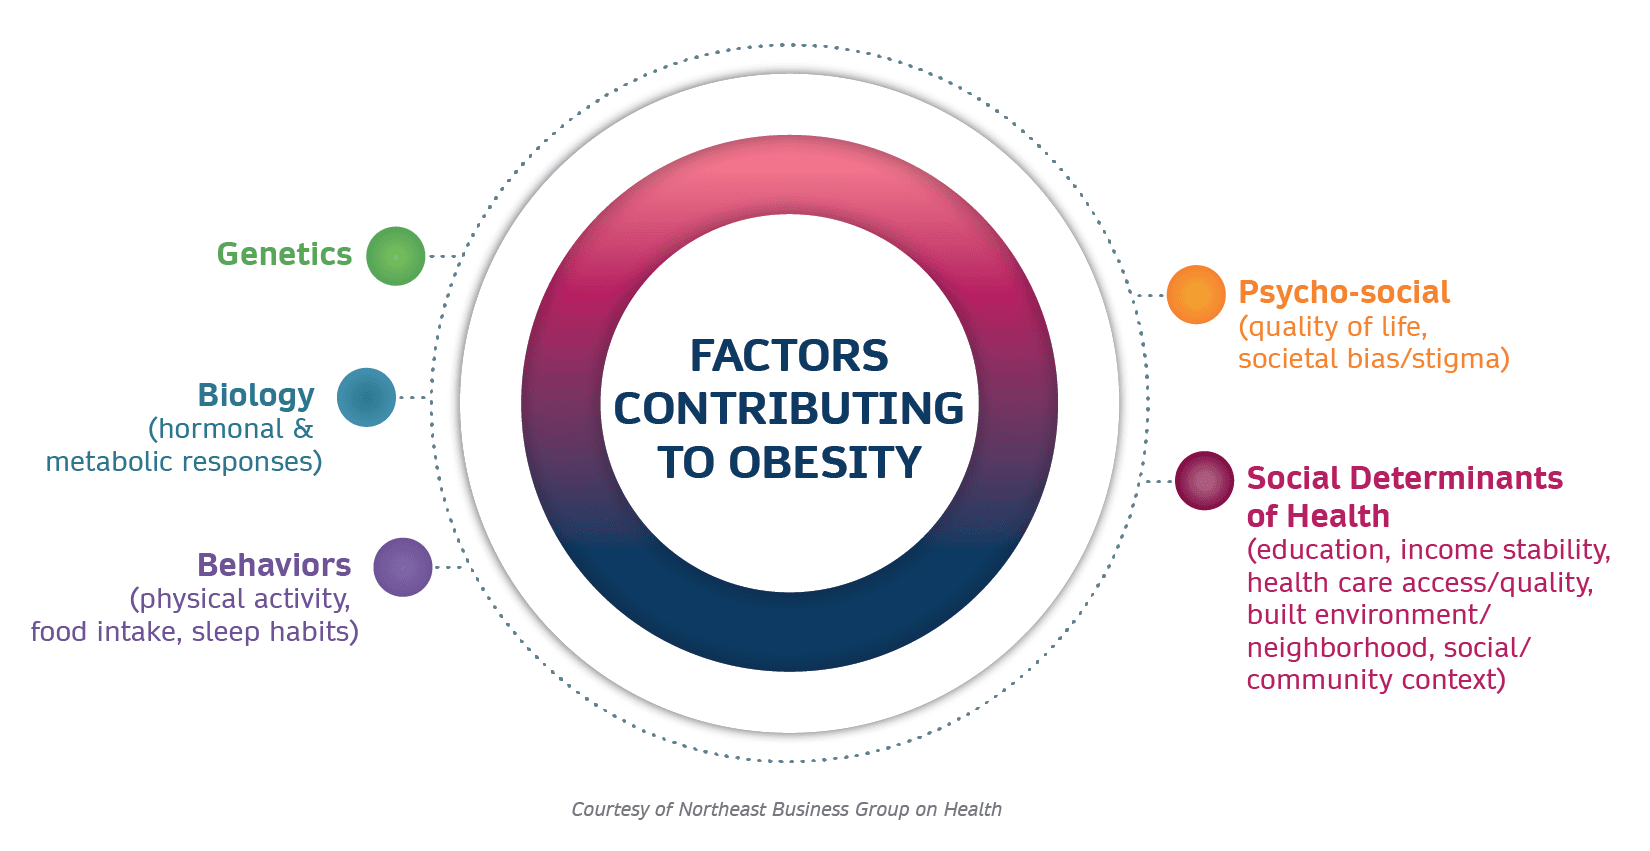 7.Social Factors Contribute to Obesity